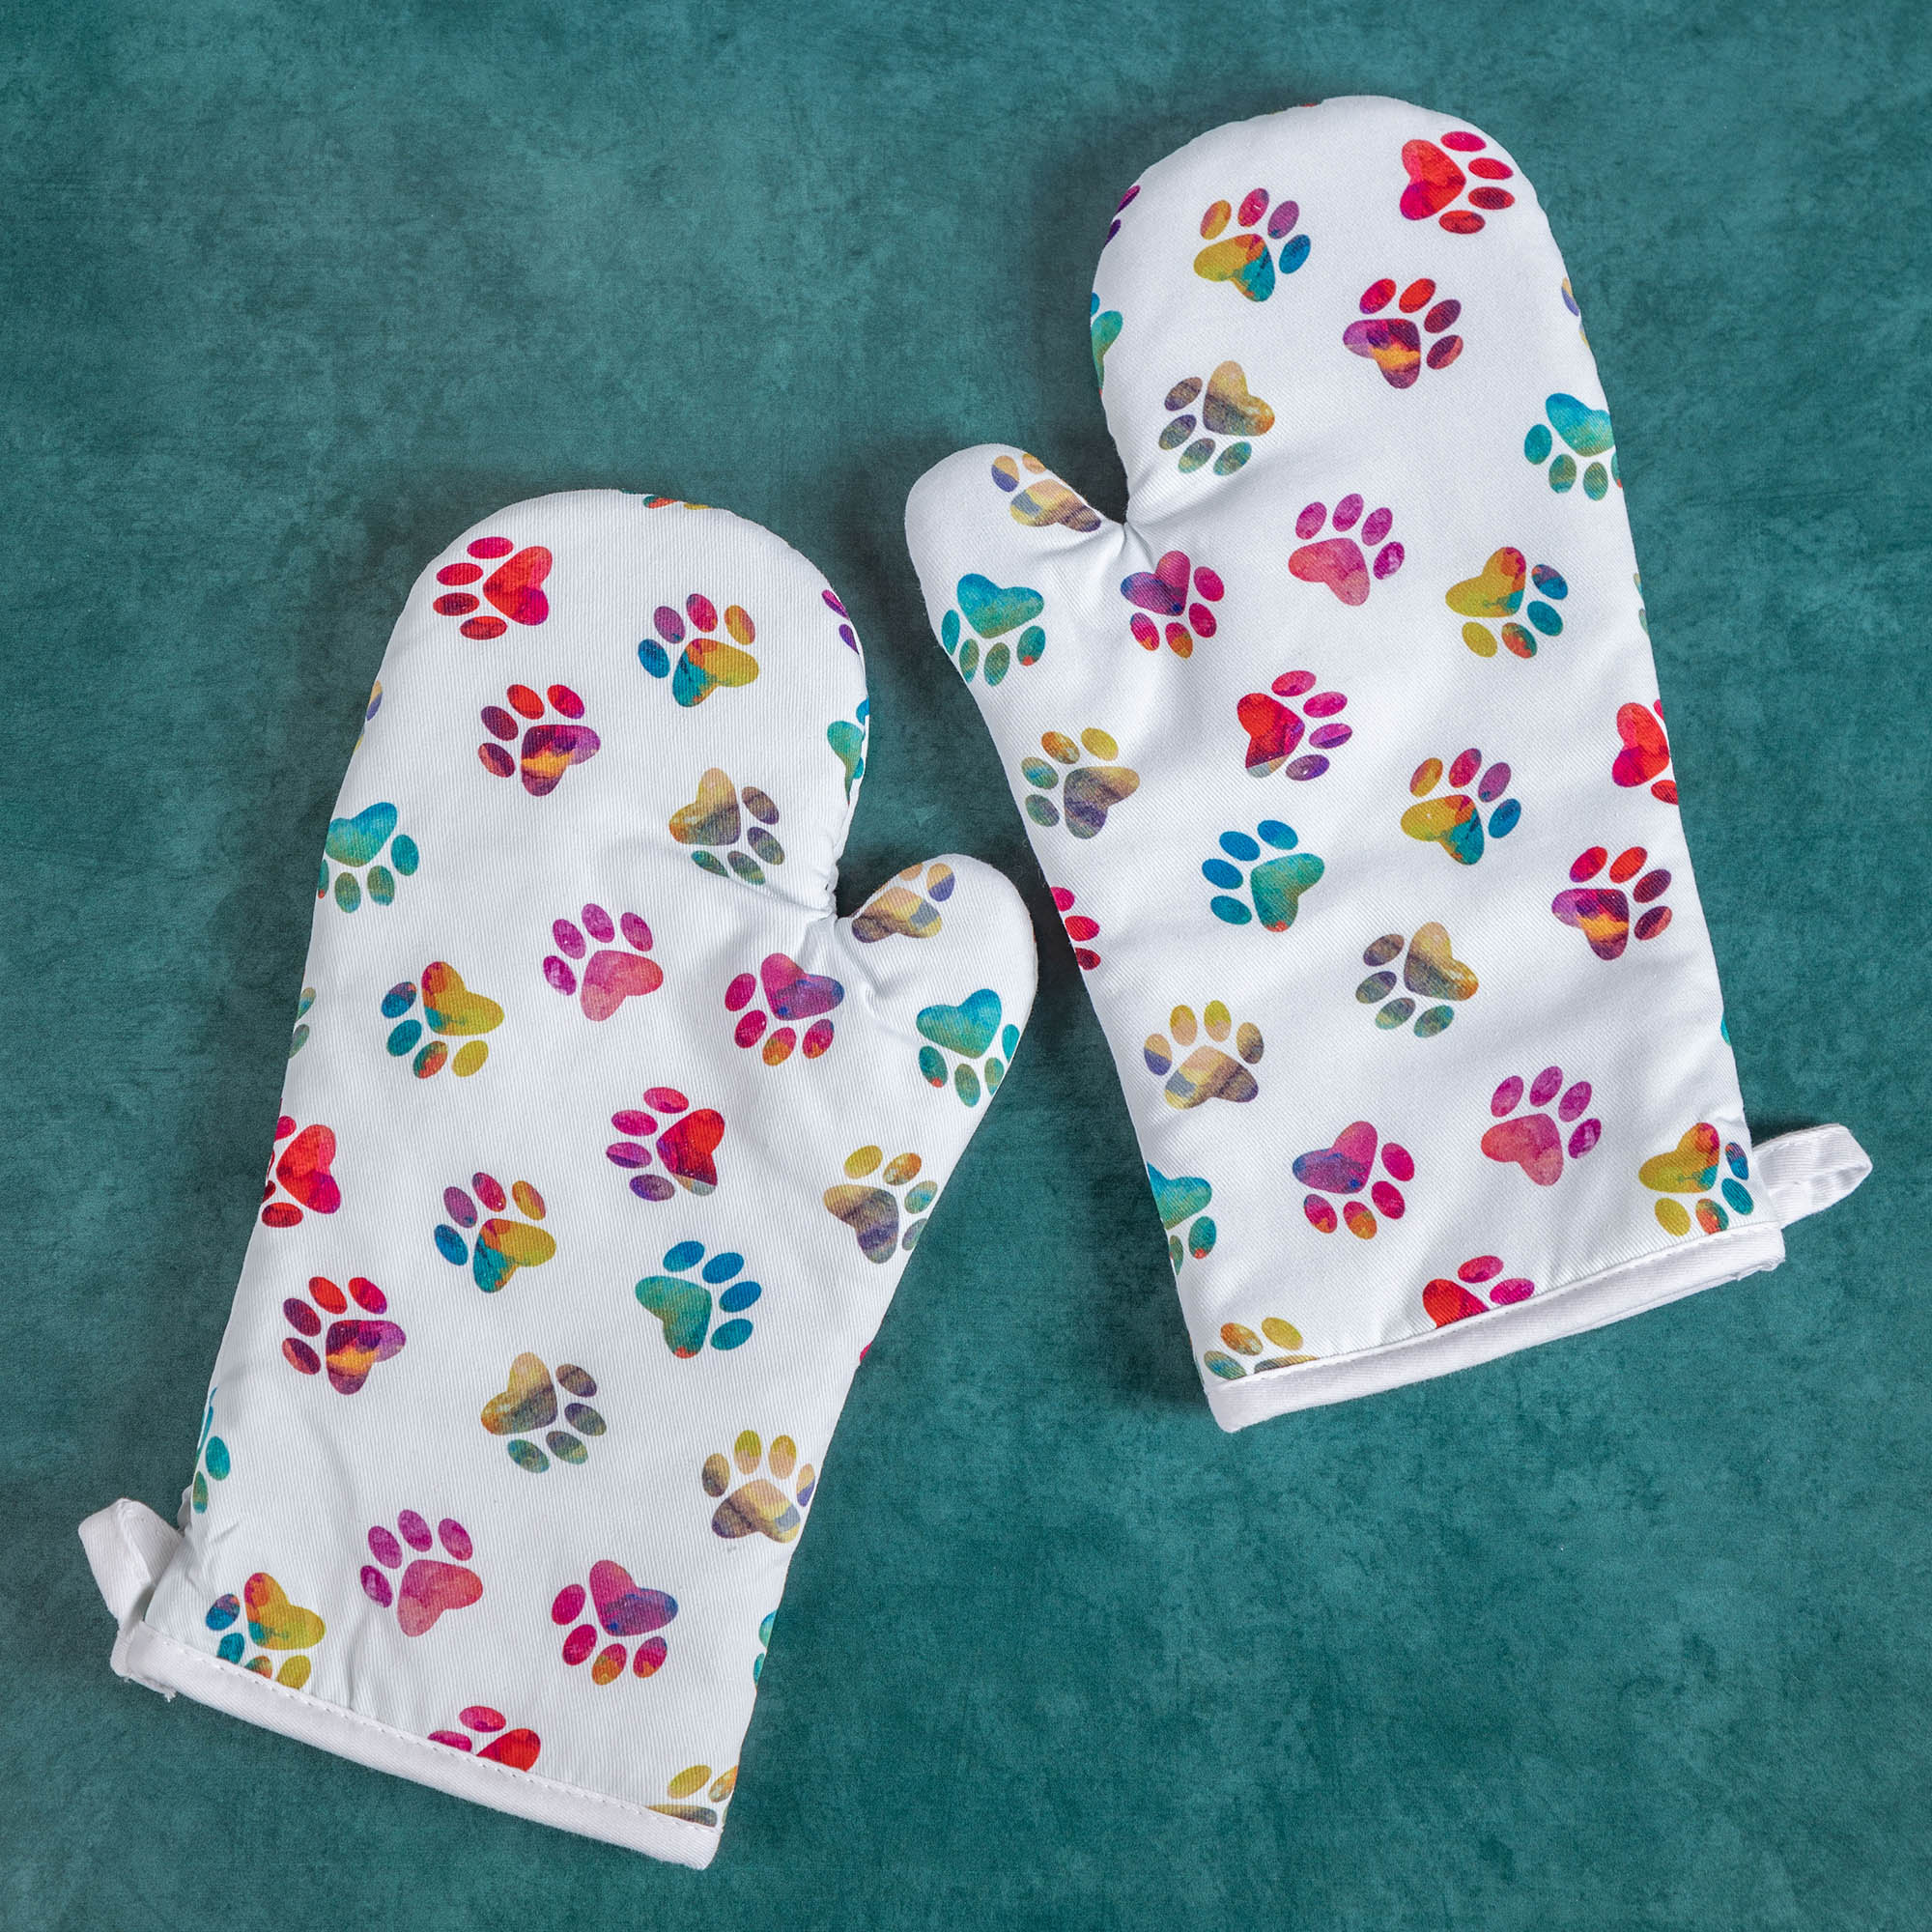 Rainbow Ombre Paws Kitchen Linens - Oven Mitts - Set Of 2 - White